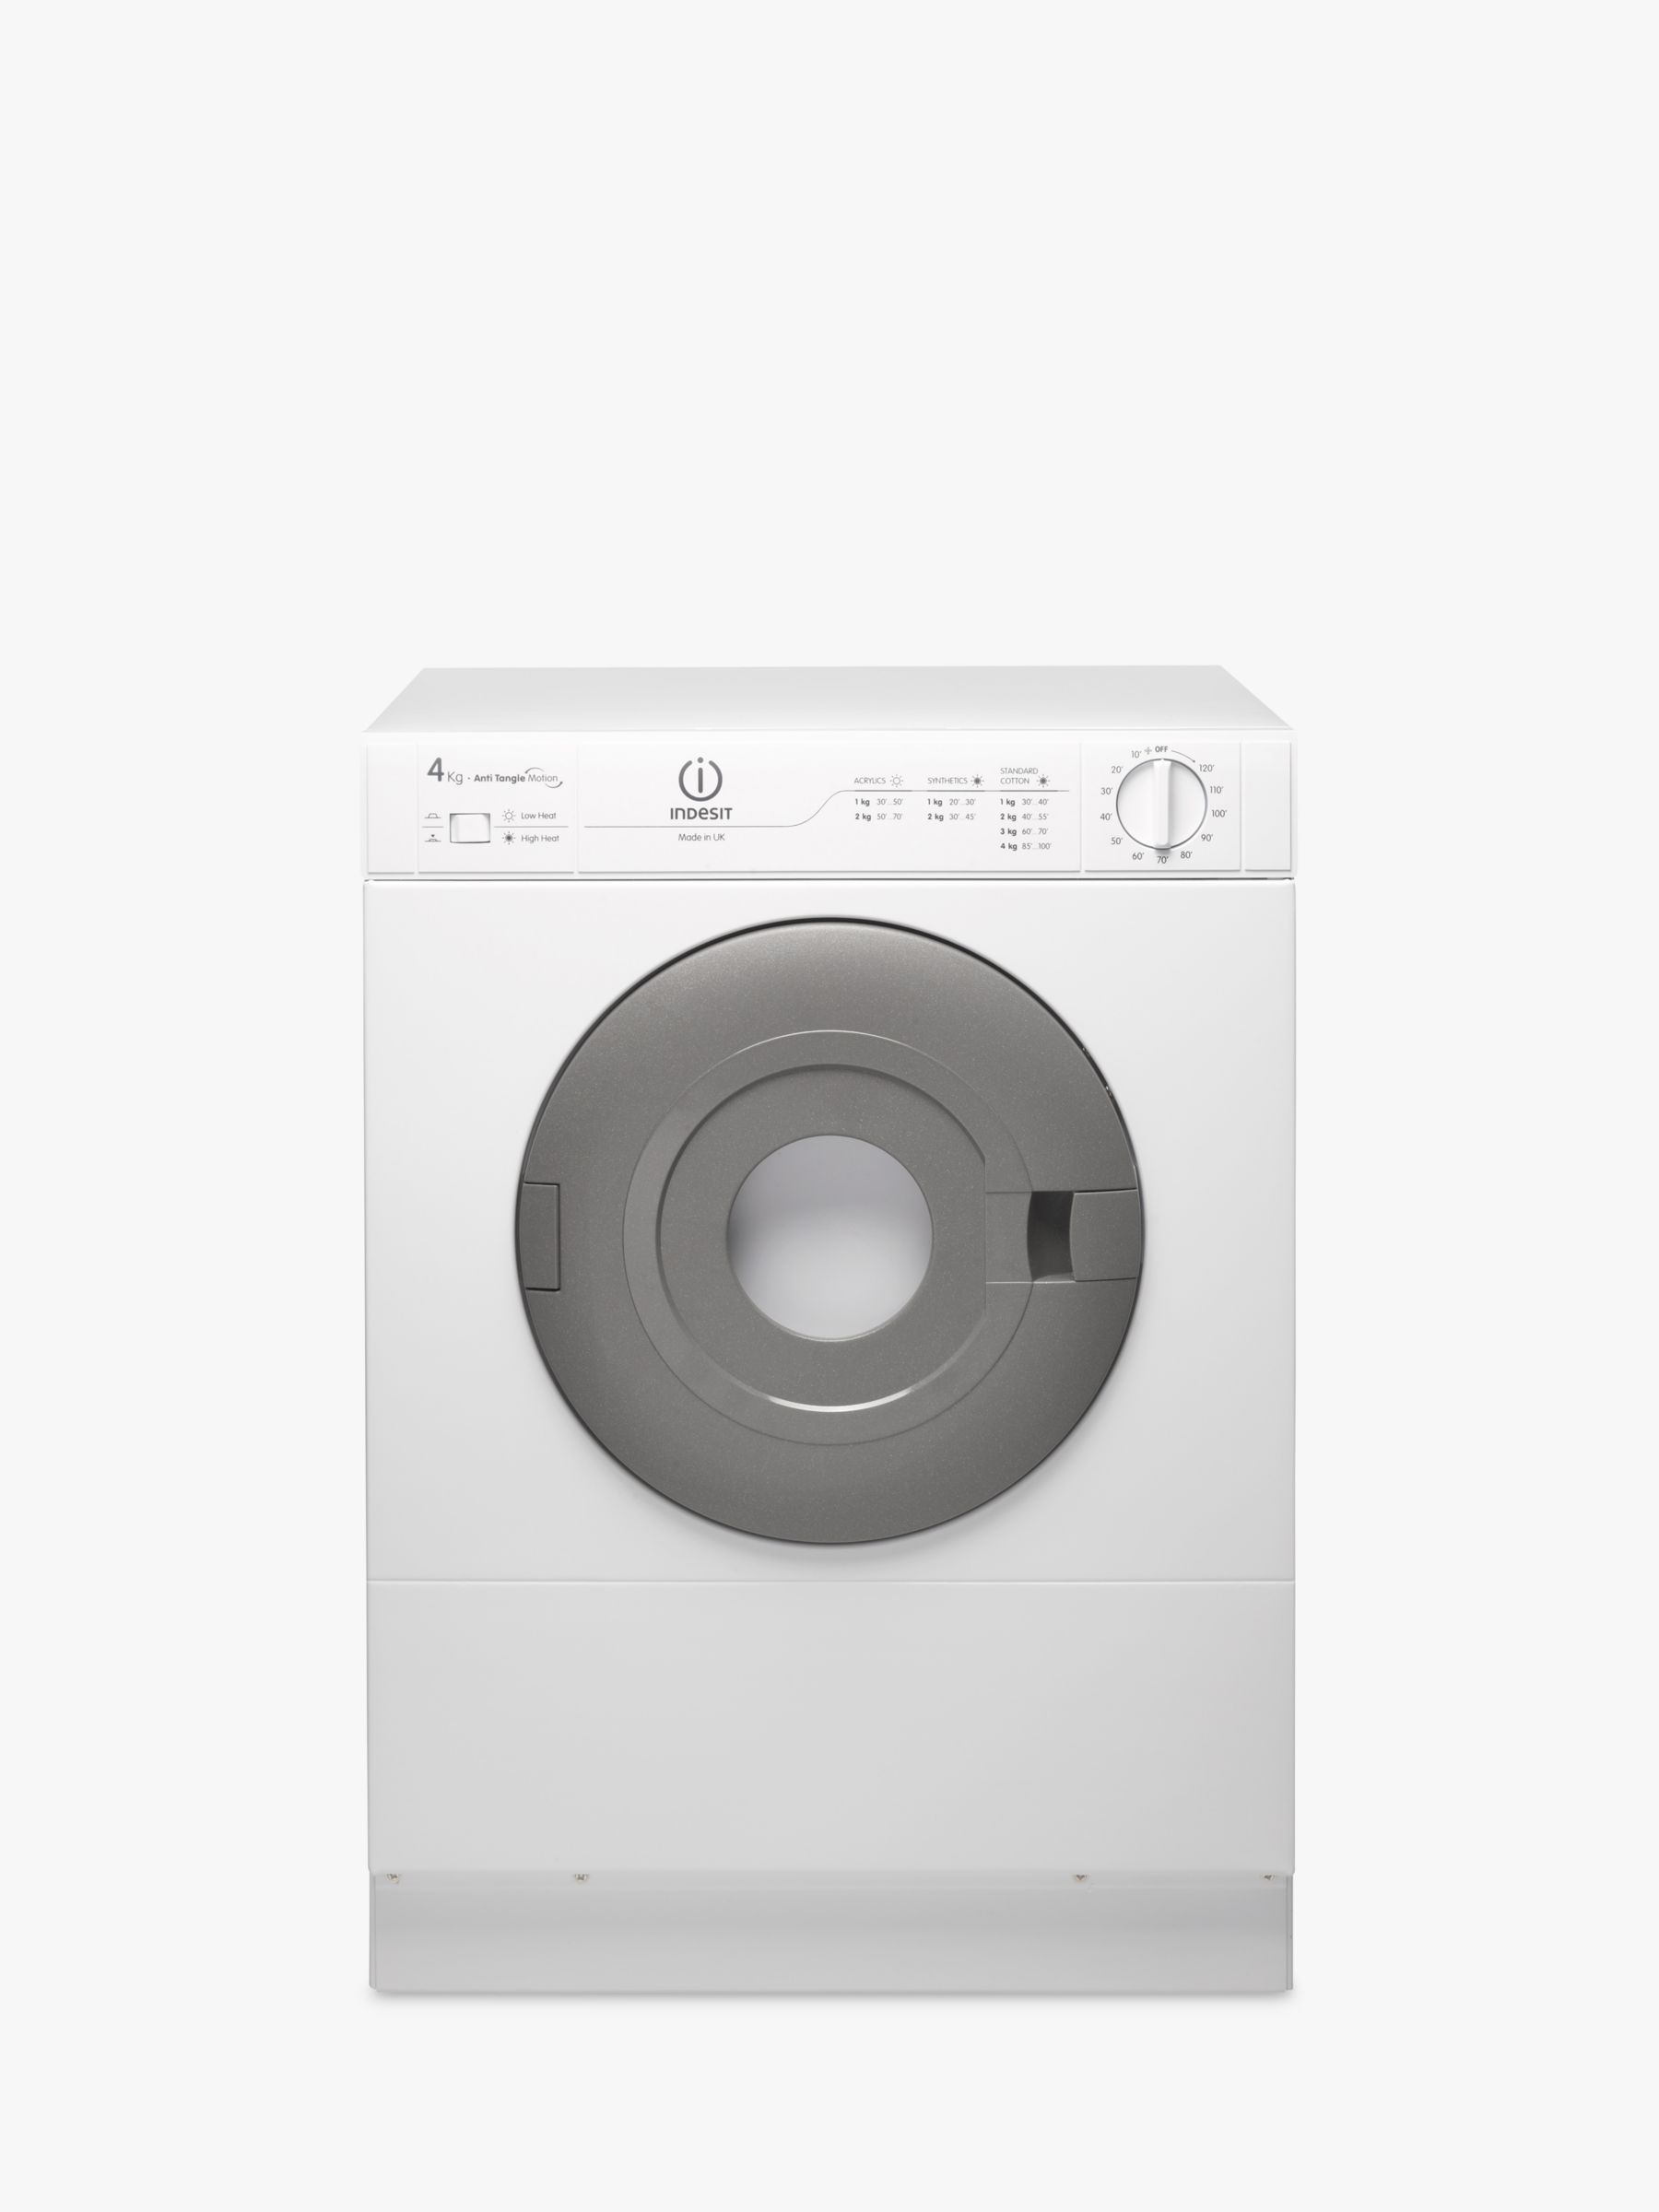 Indesit IS41V Vented Compact Tumble Dryer, 4kg Load, White